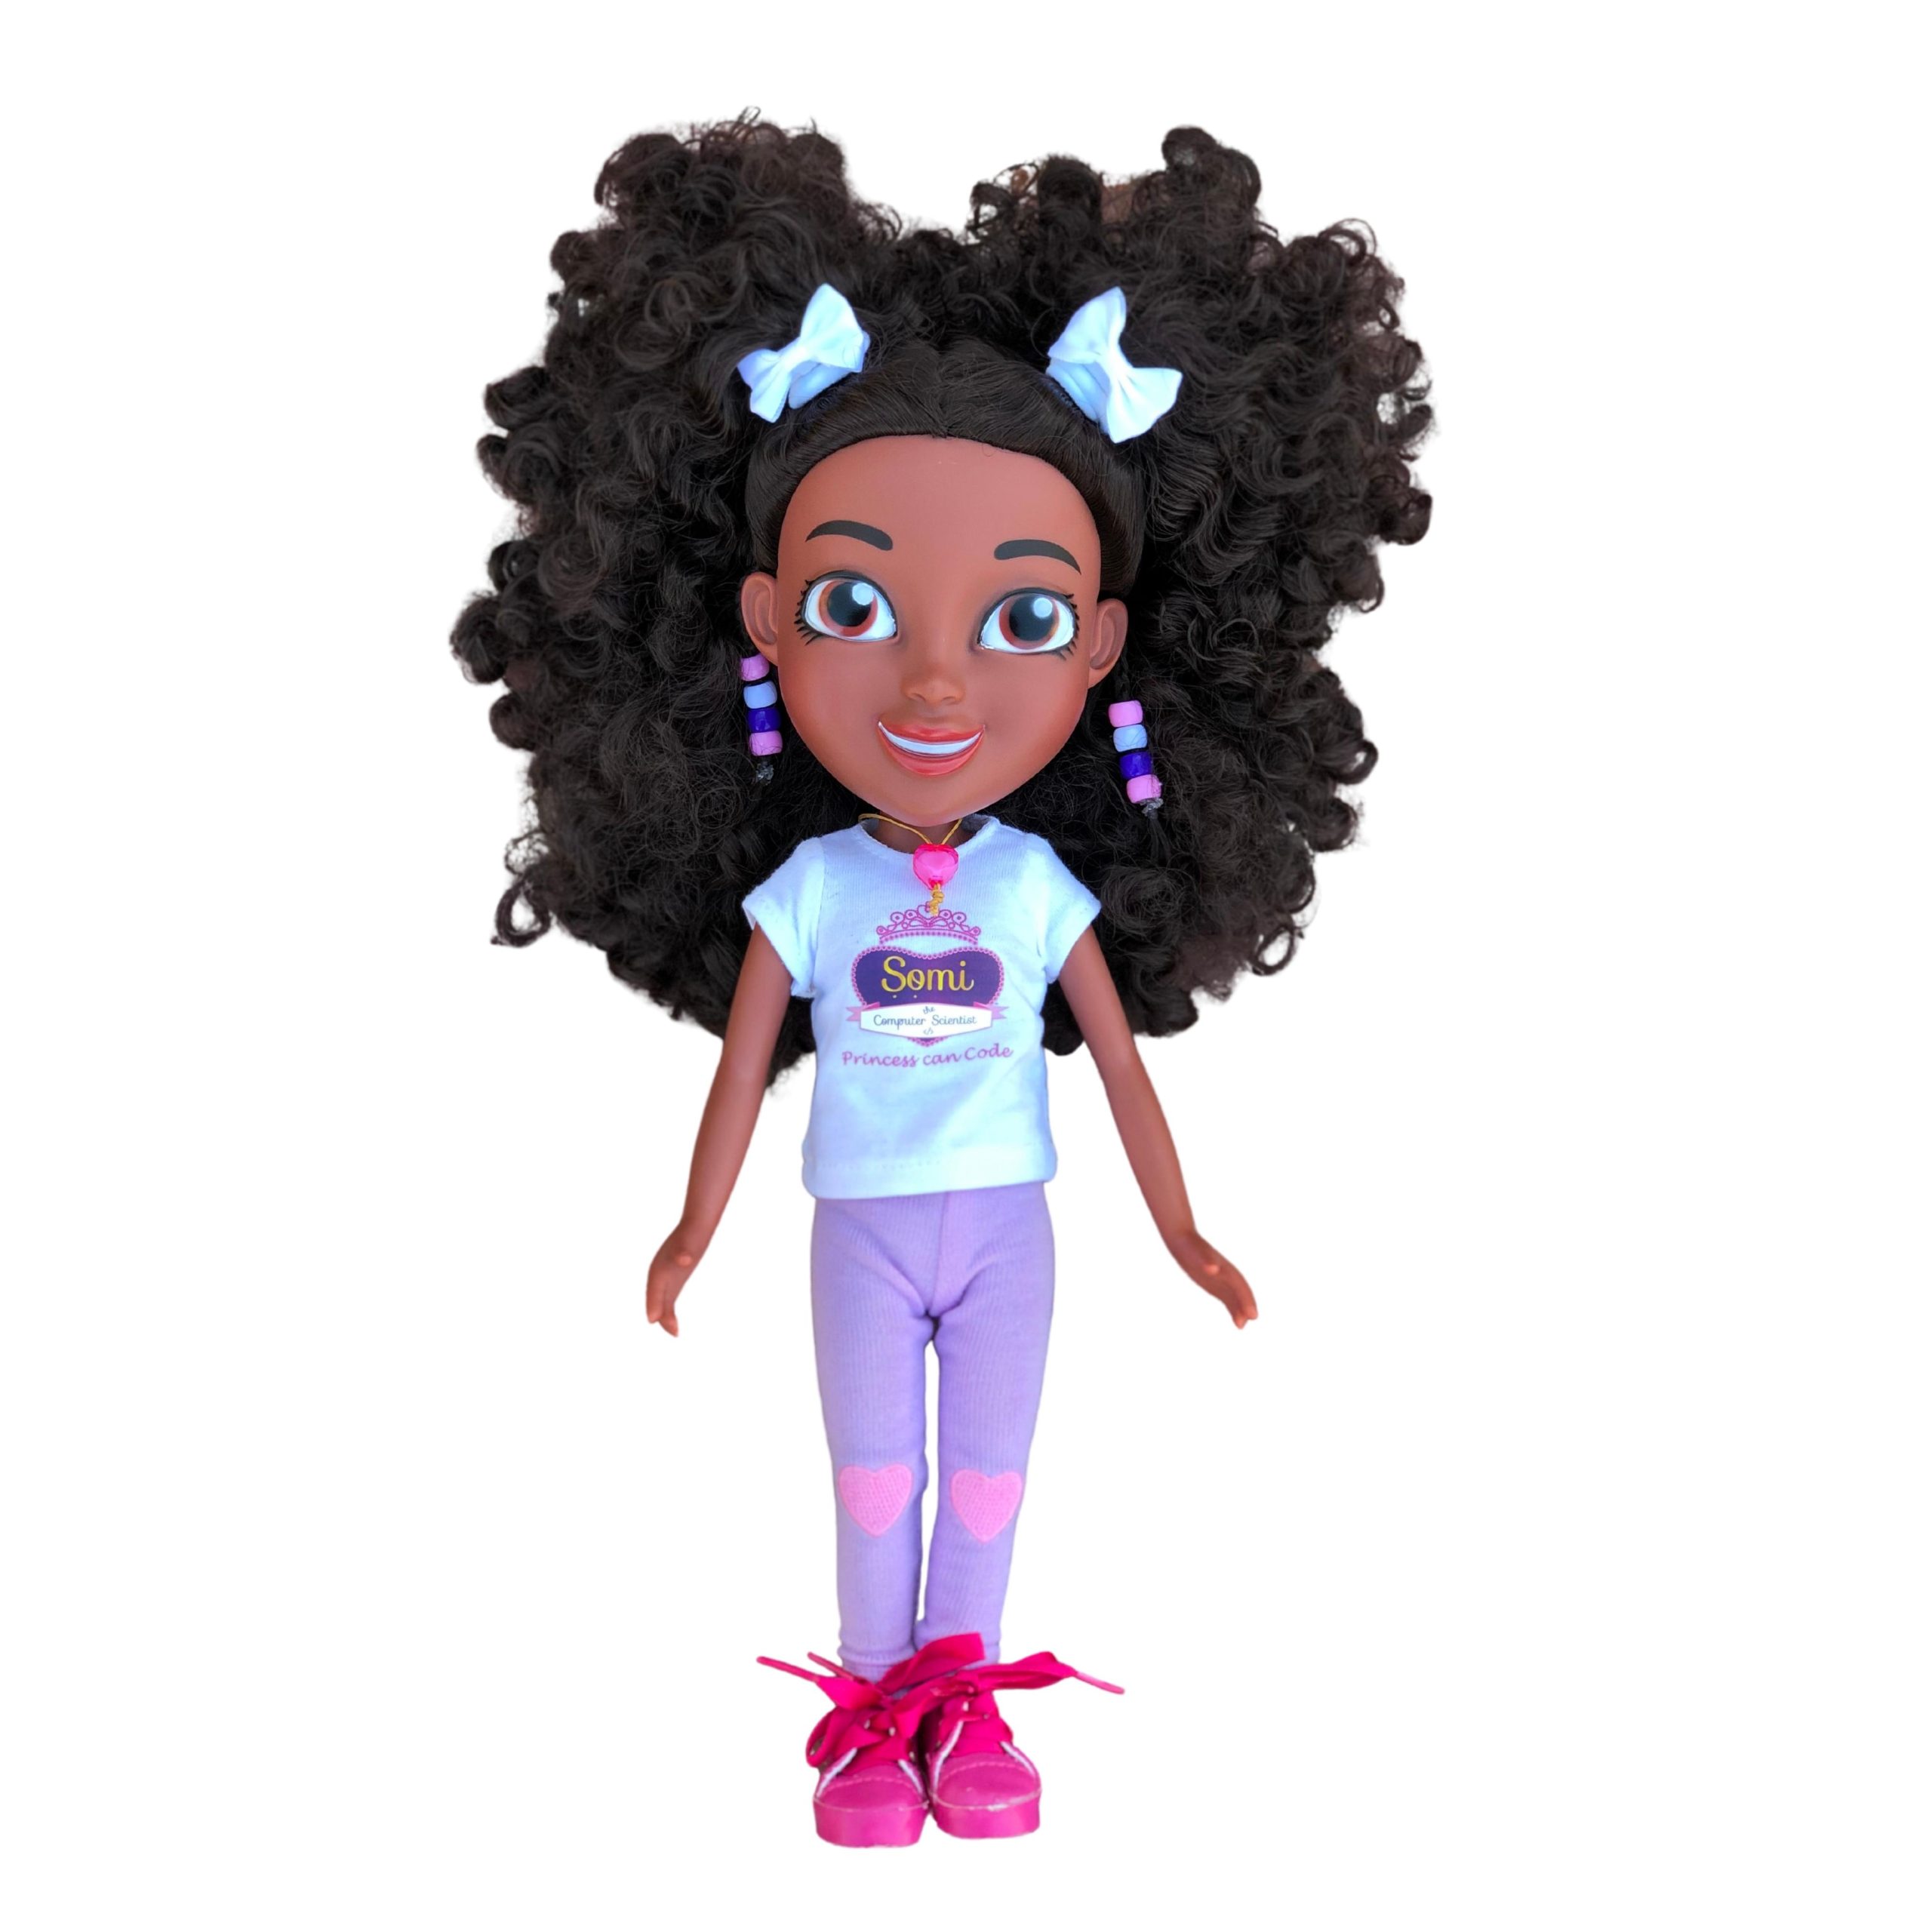 The First Interactive African American STEM Doll Trailblazes The Tech & Toy Industry